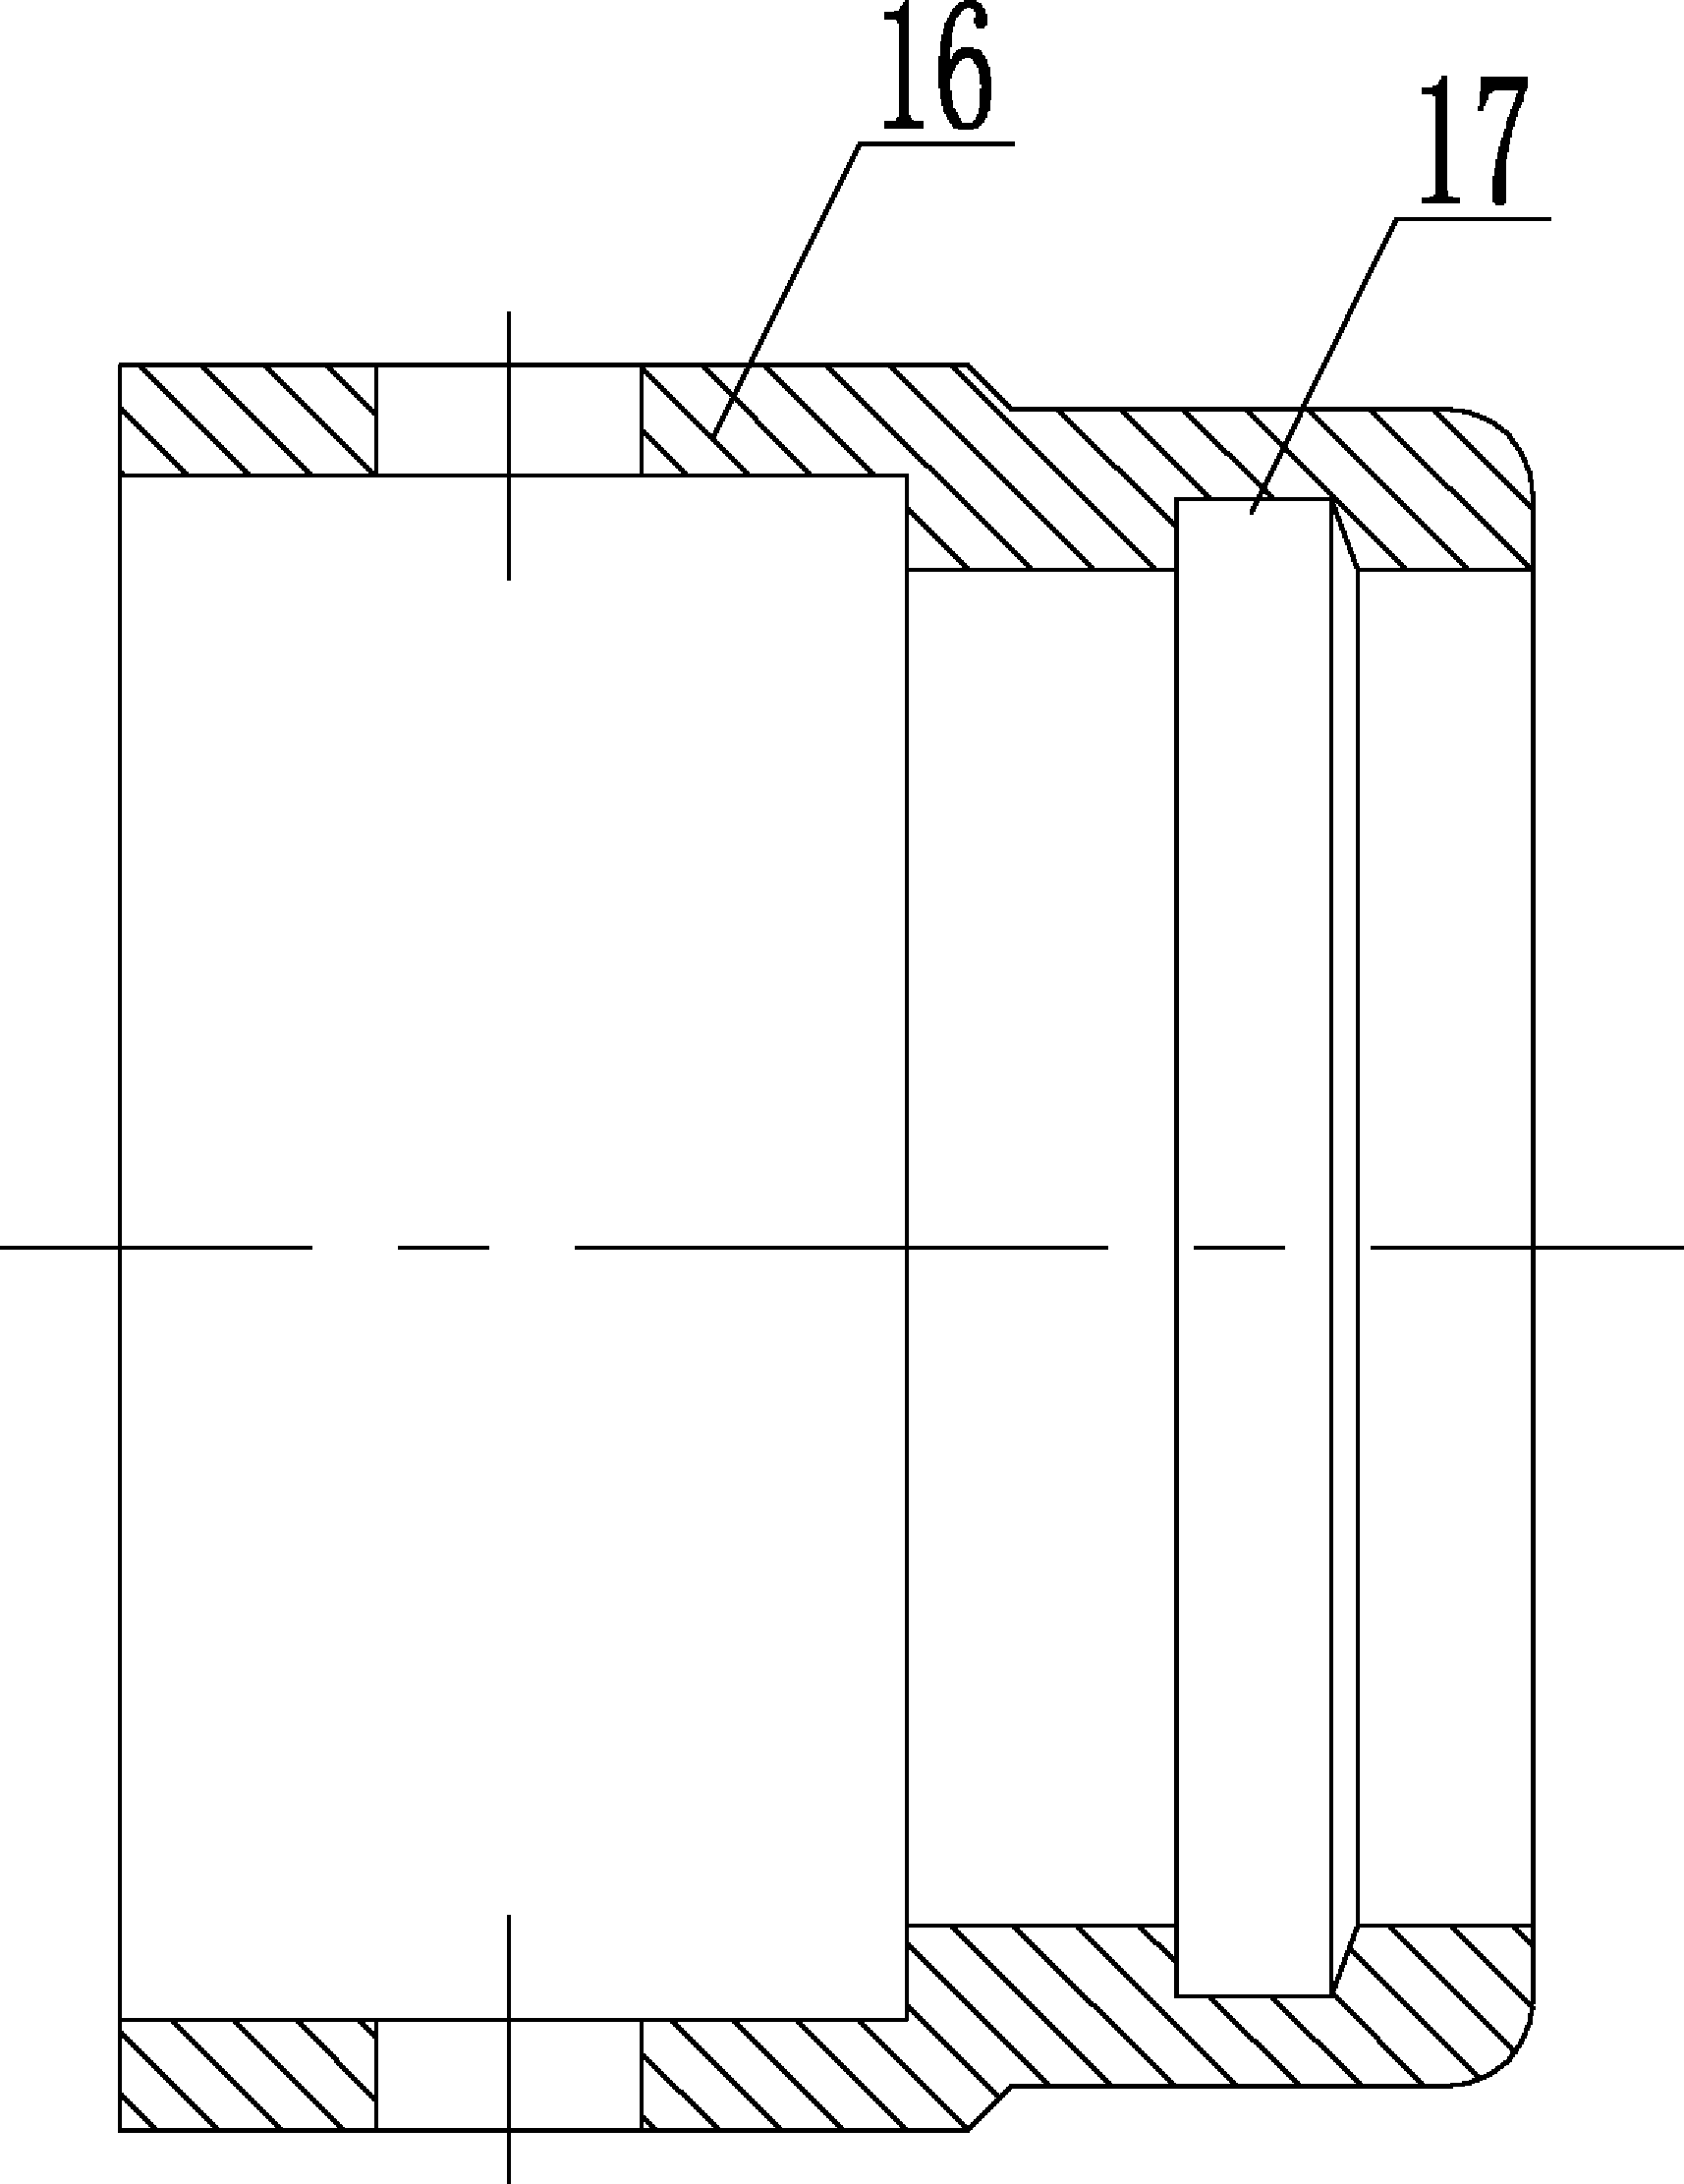 Connector assembly capable of being unlocked automatically and connector socket thereof